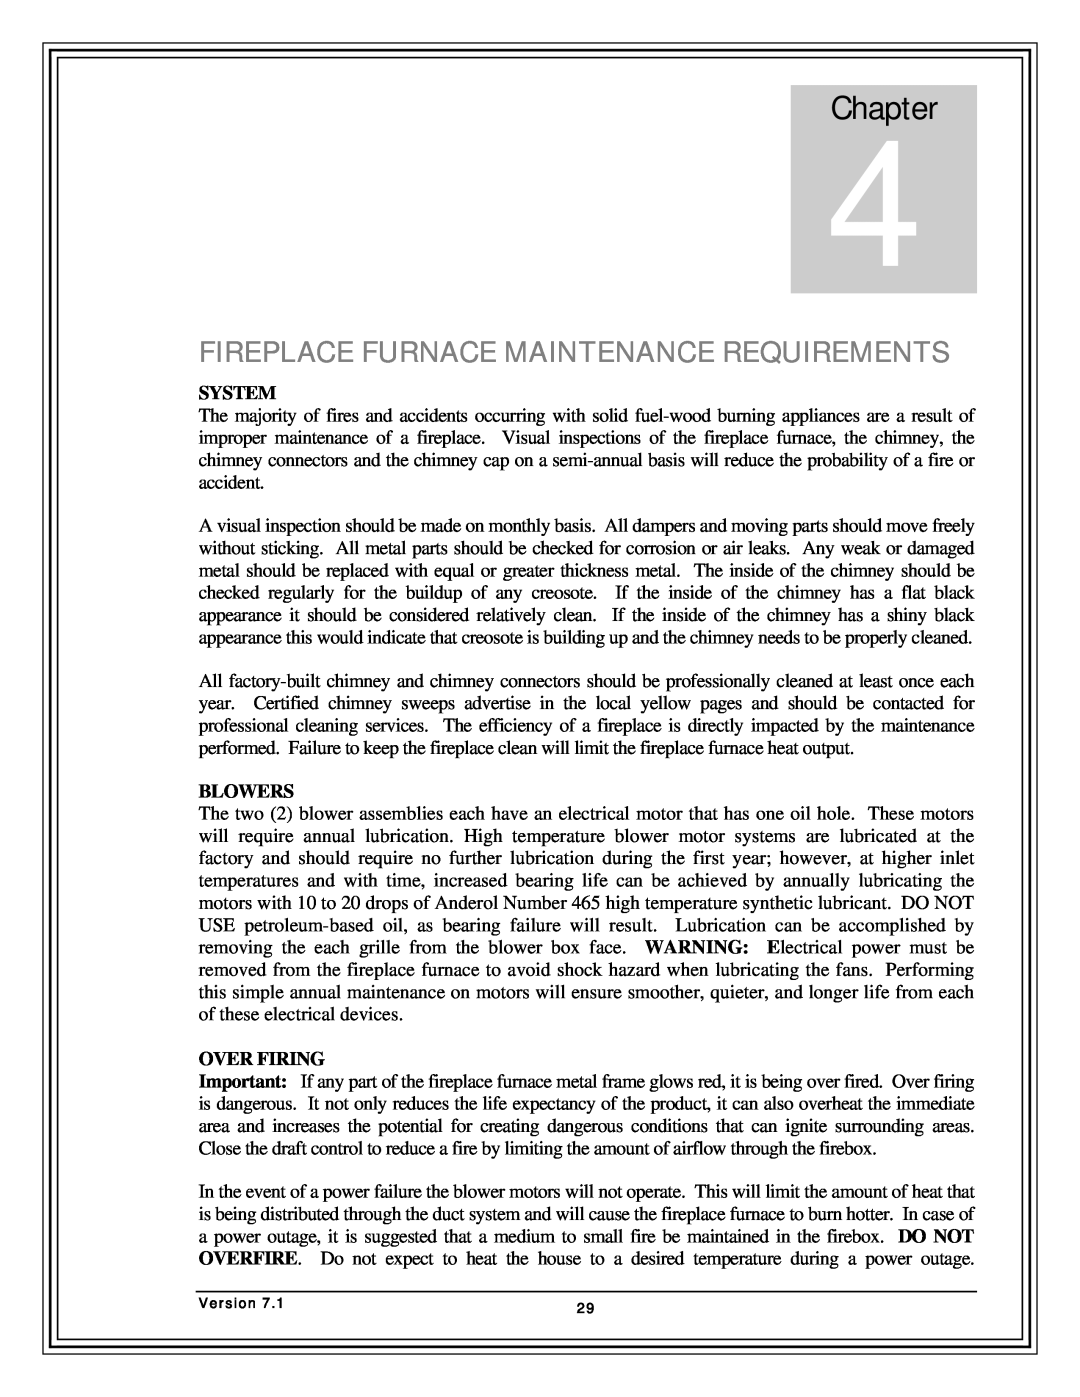 Country Flame FP37, FP42, Fireplace FP33 manual 4Chapter, Fireplace Furnace Maintenance Requirements 